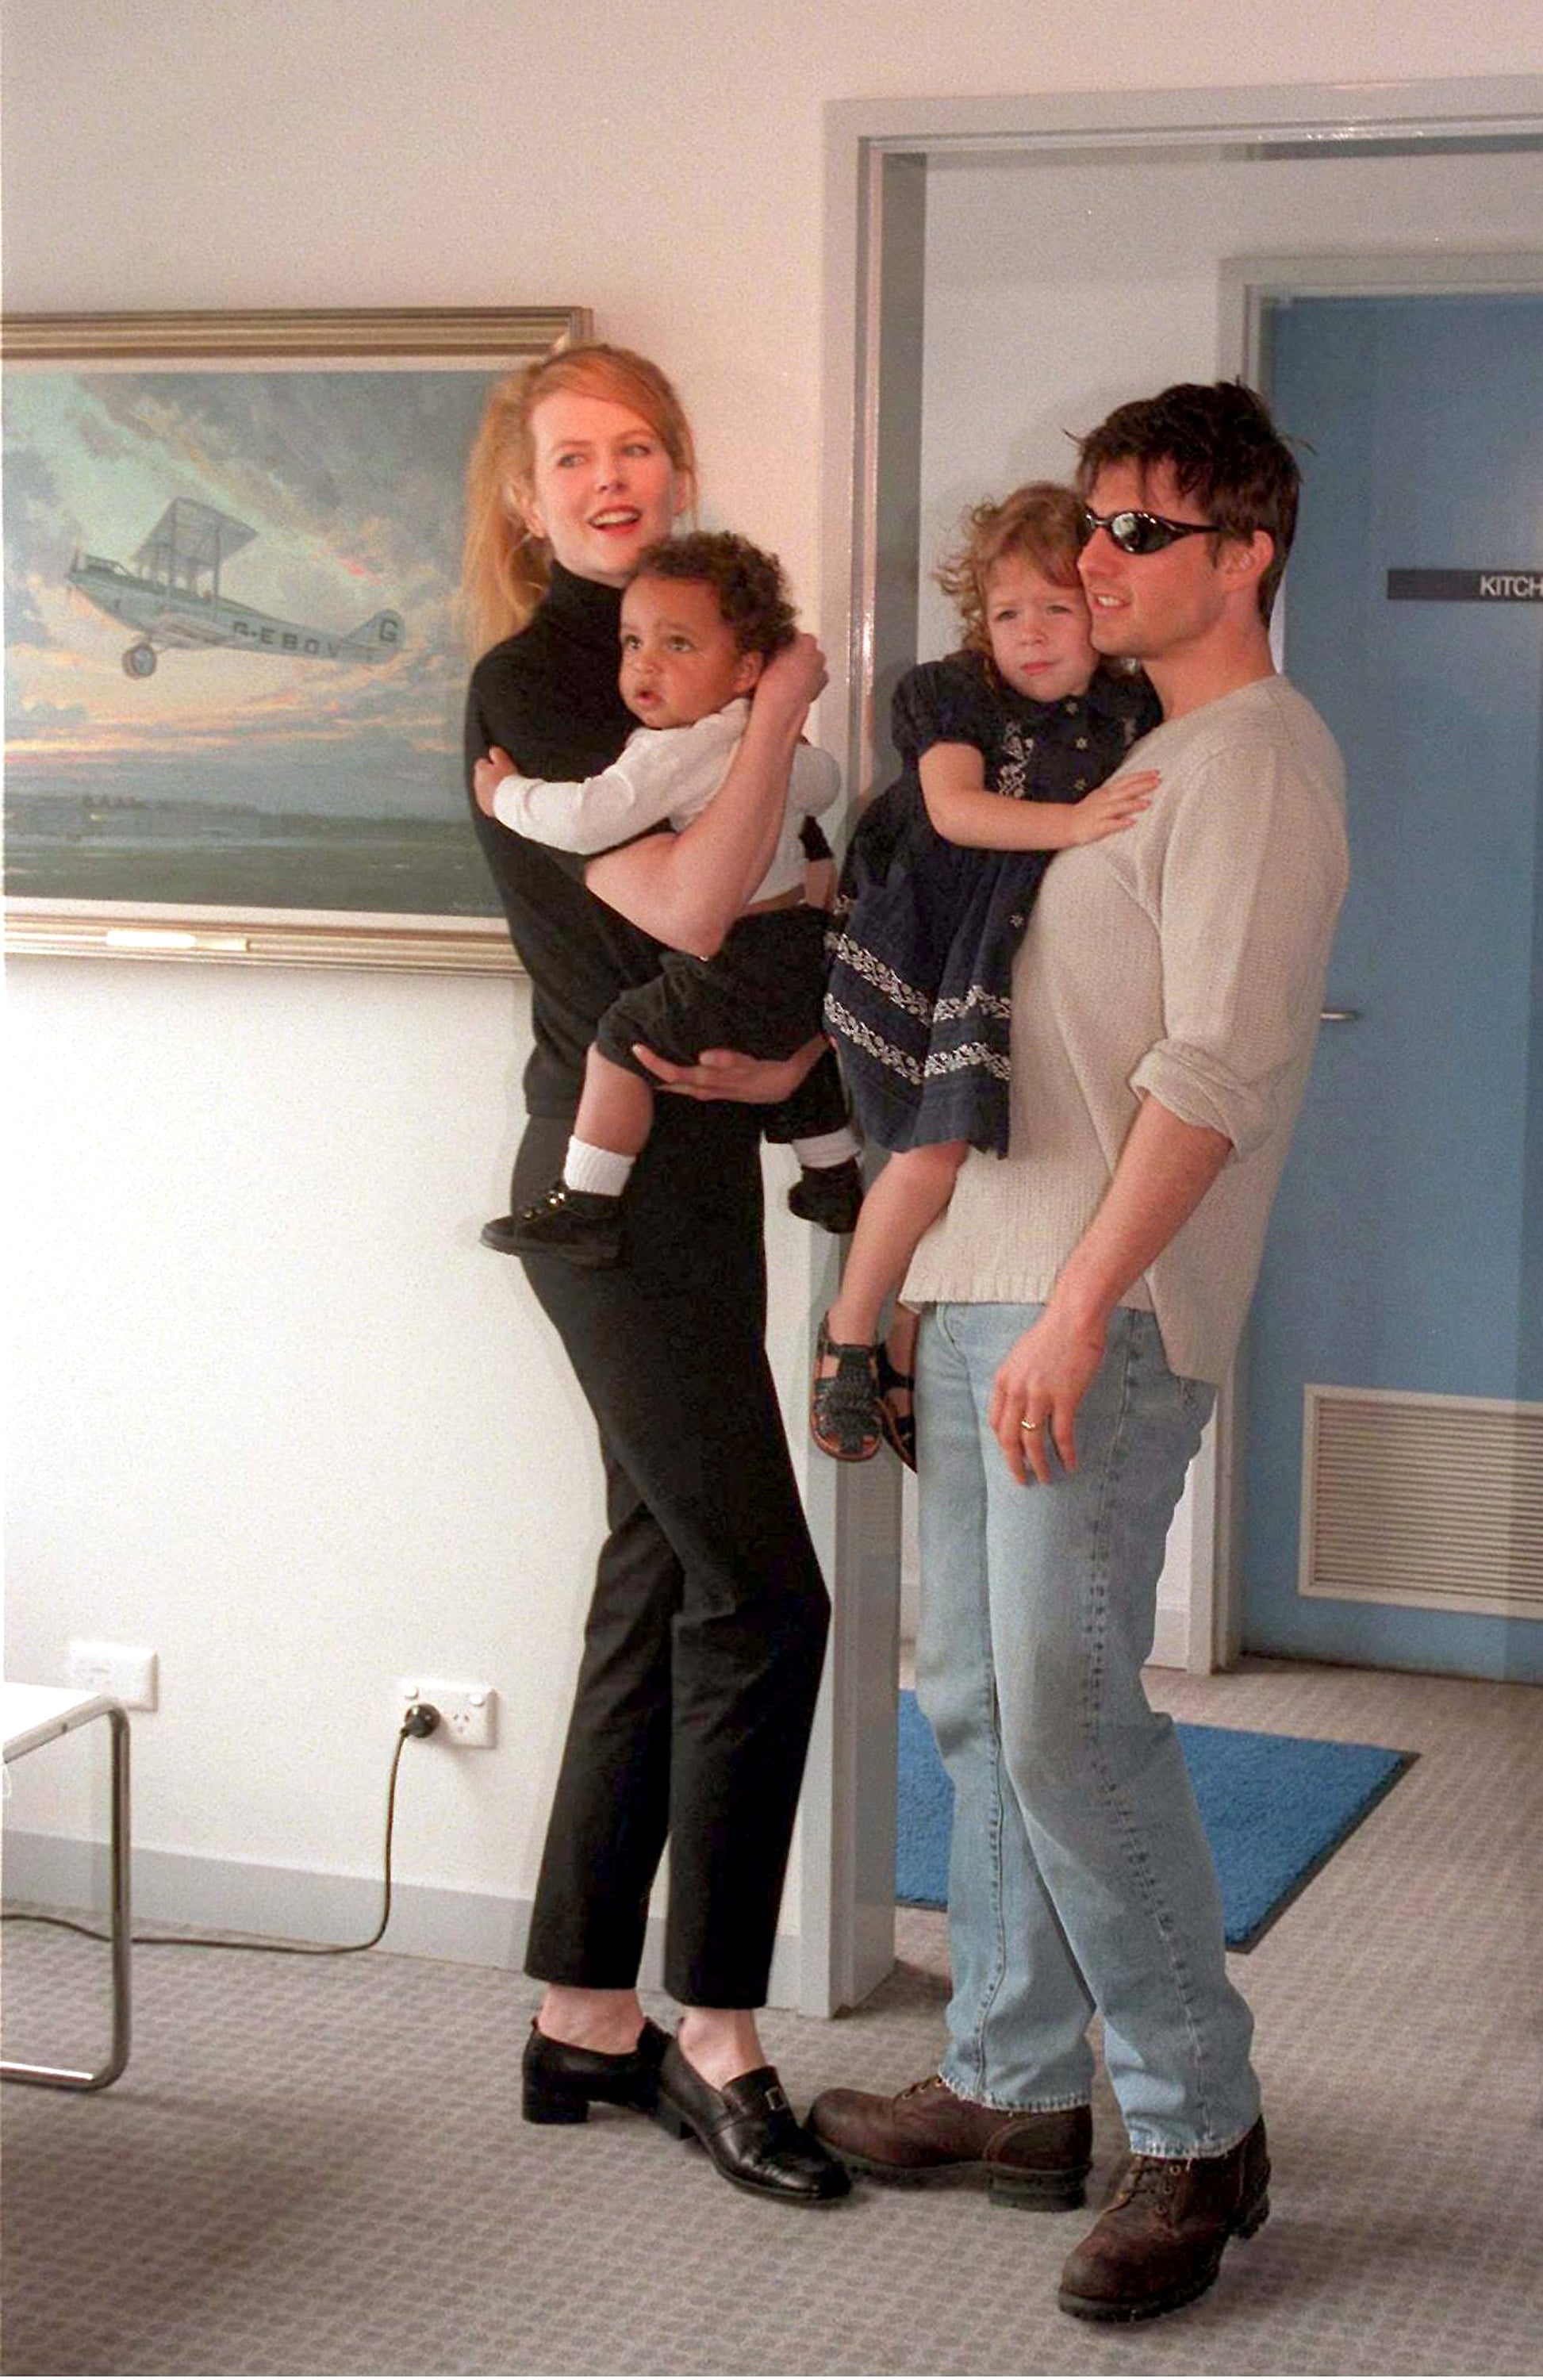 SYDNEY, AUSTRALIA - JANUARY 24: Actors Nicole Kidman and husband Tom Cruise arrive at Sydney Kingsford Smith airport and introduce their children Connor and Isabella to the media January 24, 1996 in Sydney, Australia. (Photo by Patrick Riviere/Getty images)